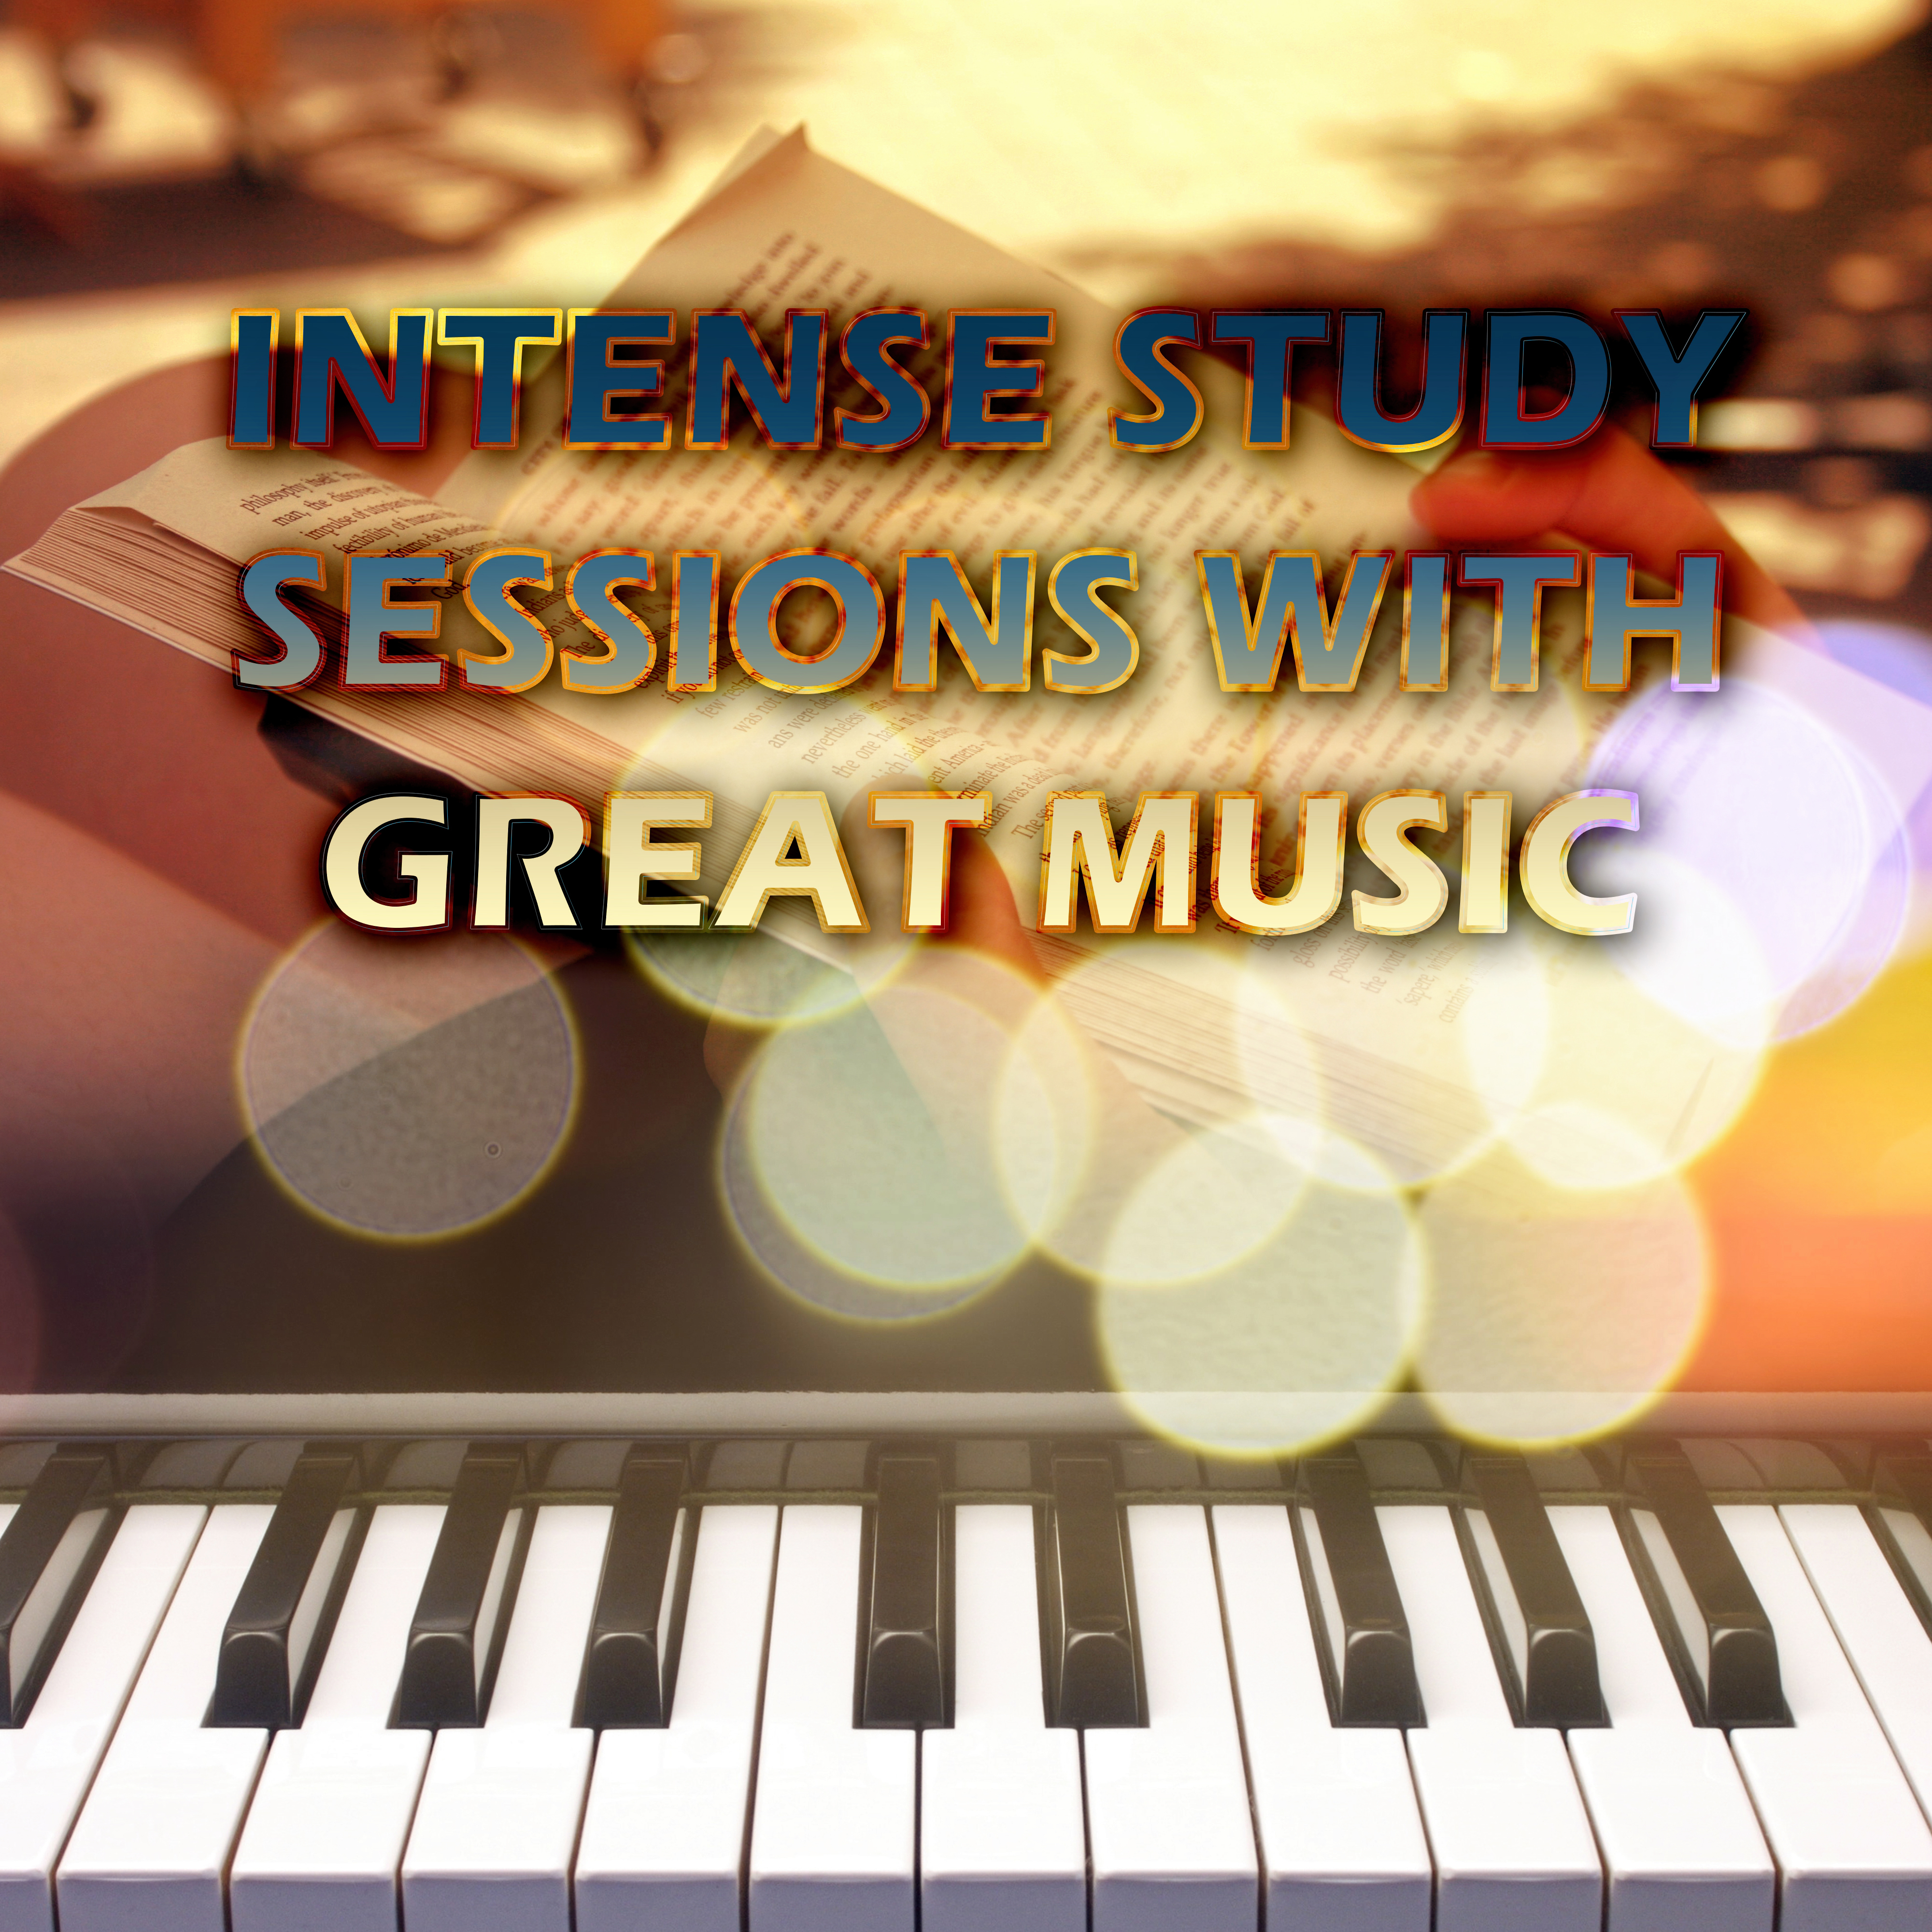 Intense Study Sessions with Great Music – Logical Thought, Classical Music to Help You Concentrate & Stay Focused, Increase Brain Power, Effective Study with Classics